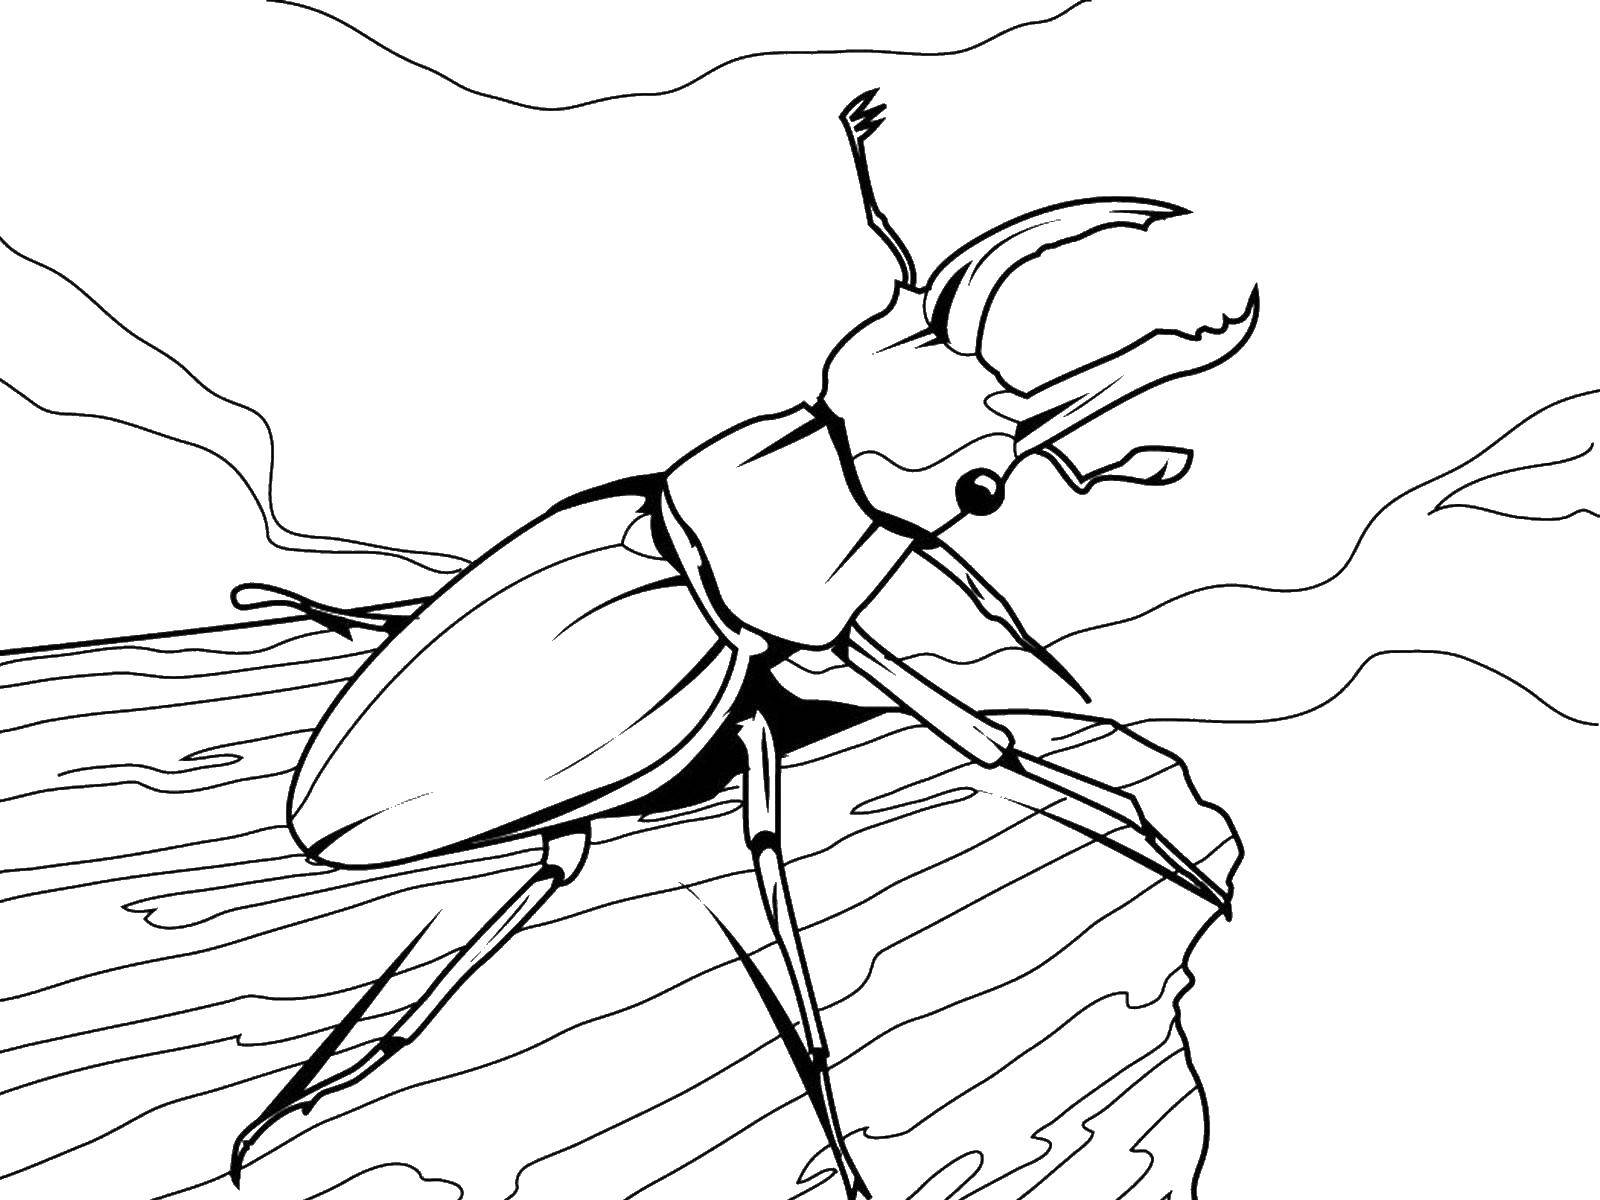 Coloring Beetle Rhino. Category insects. Tags:  , beetle, .